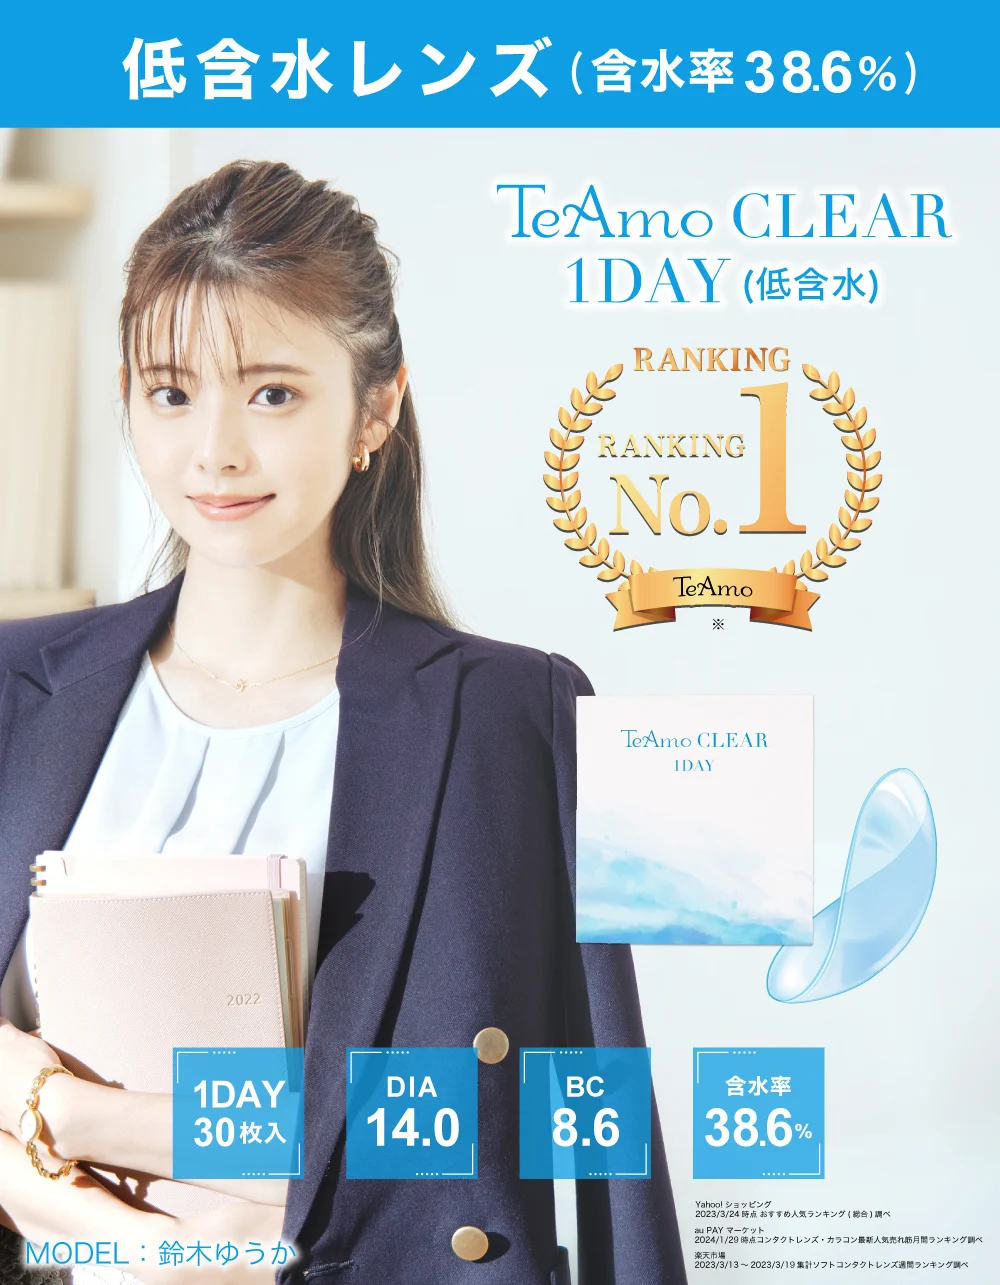 TeAmo CLEAR 1DAY 低含水トップ